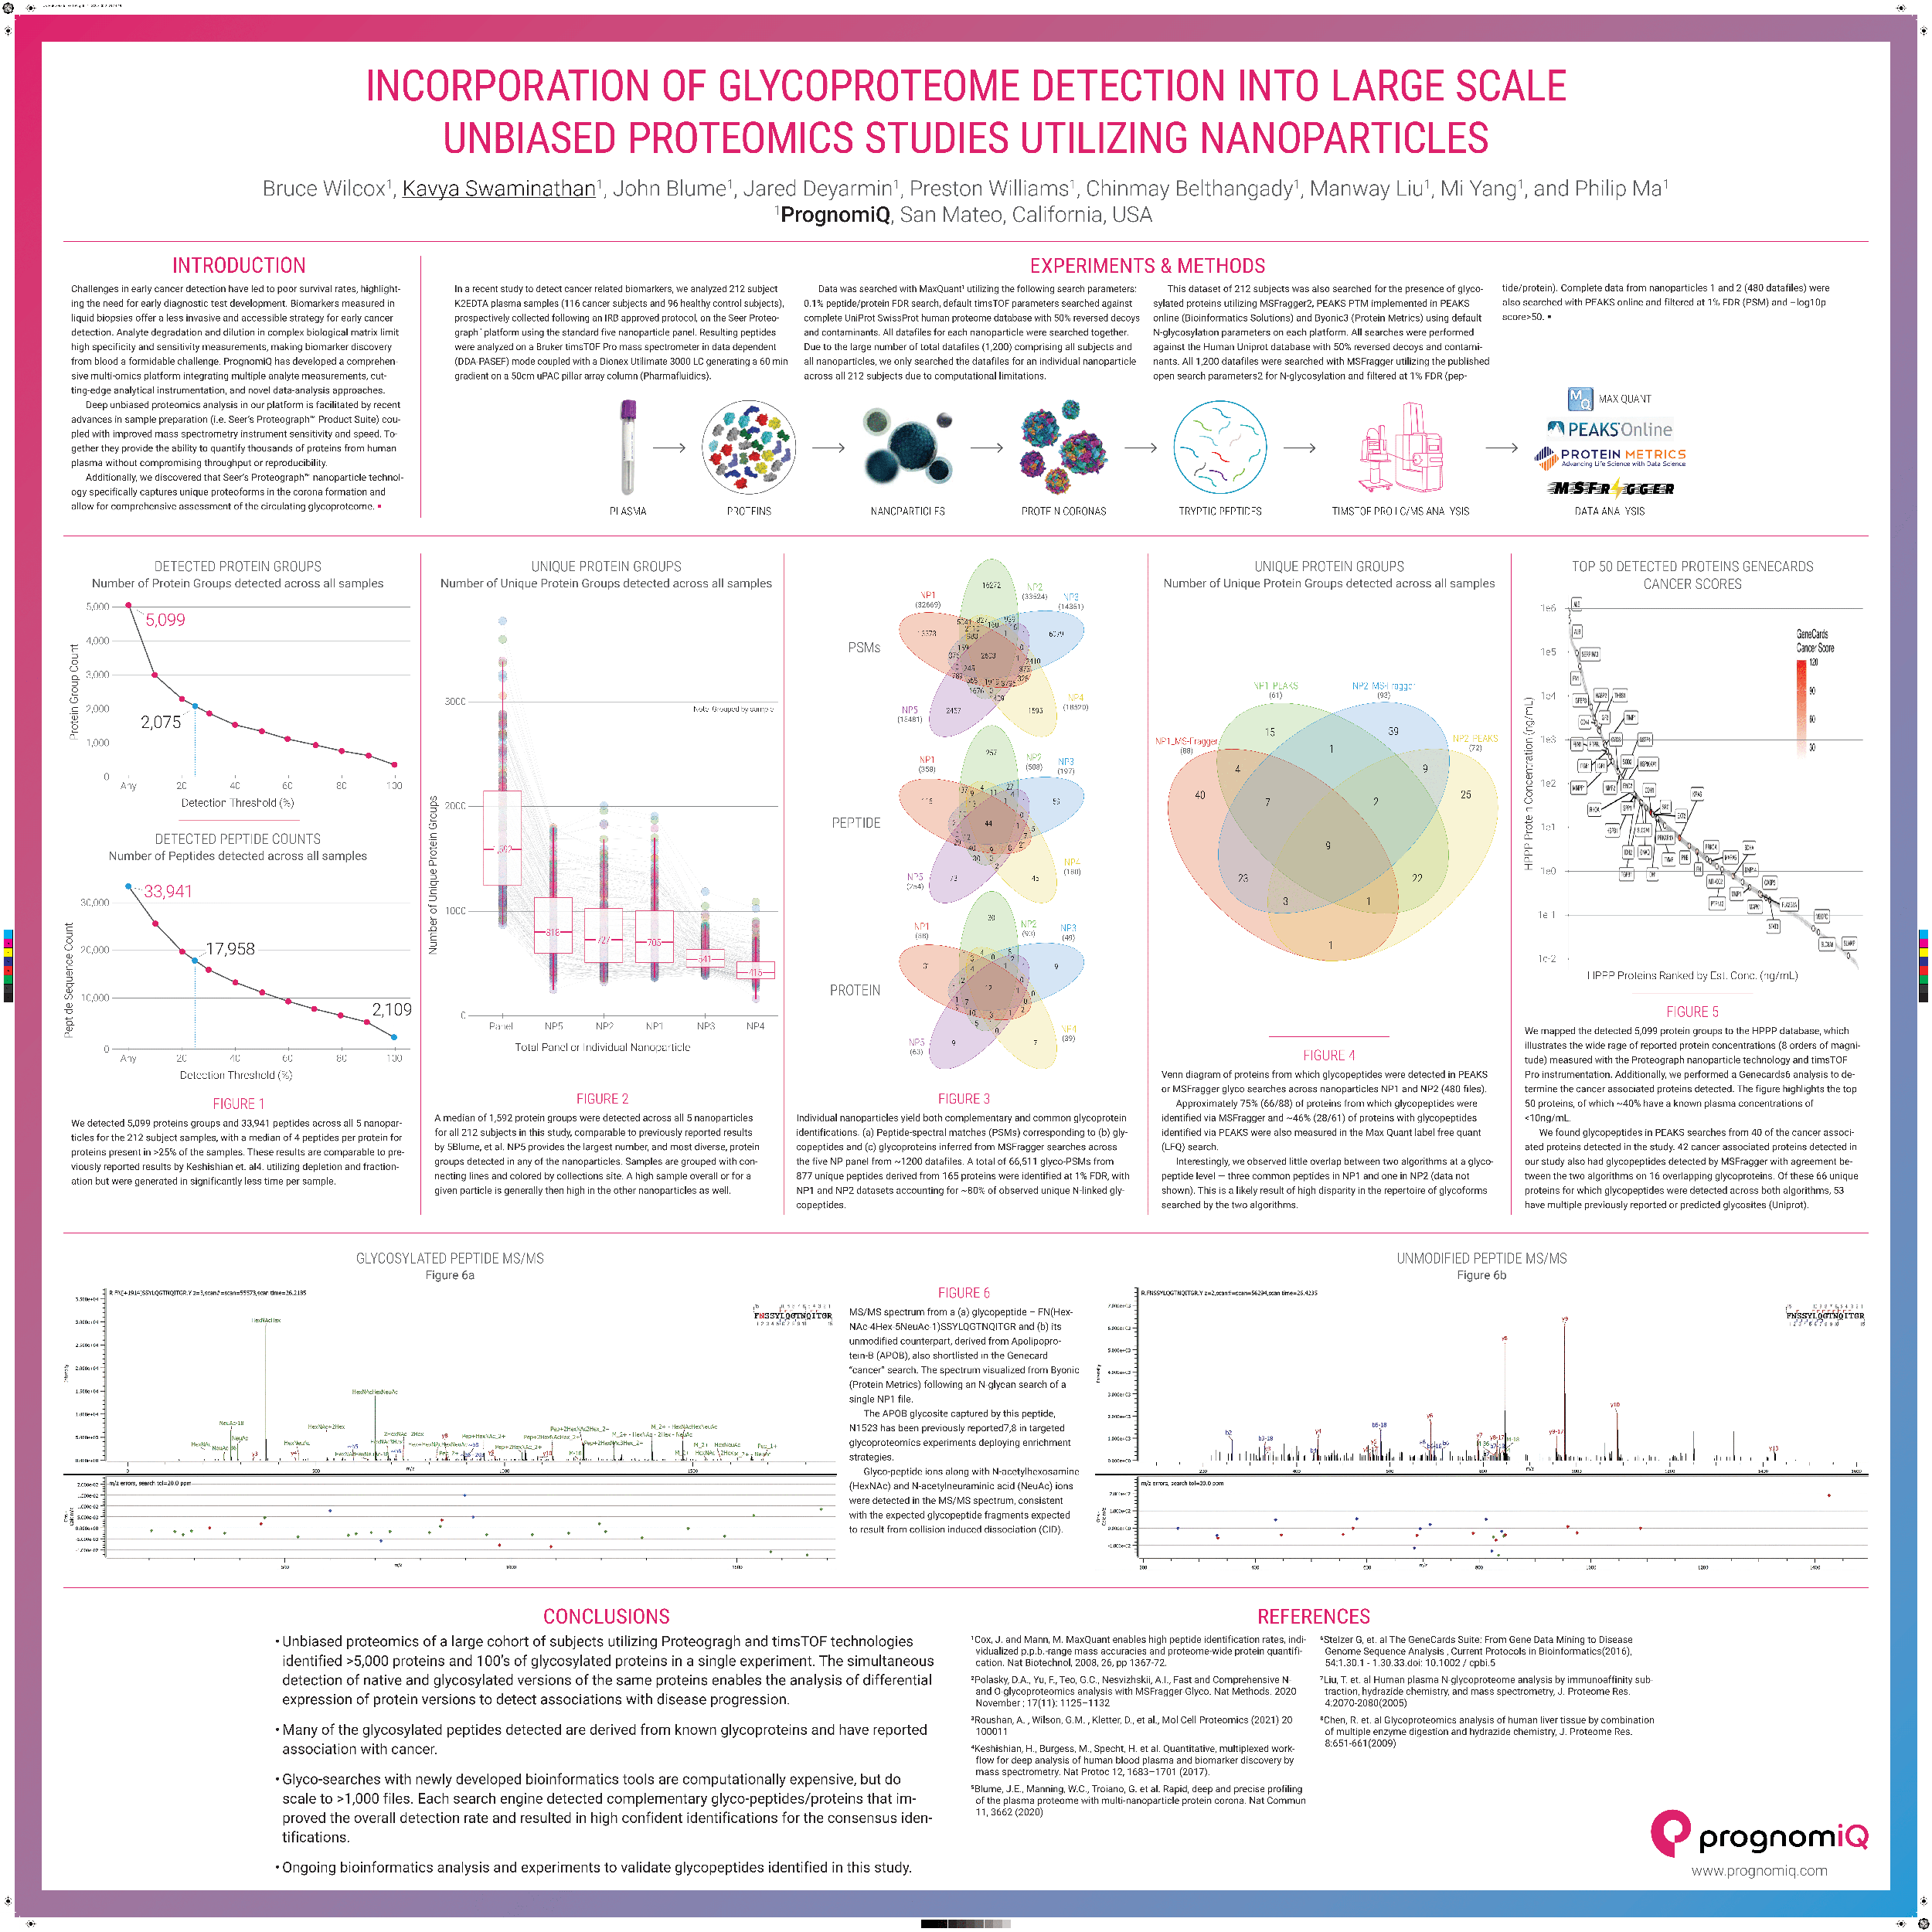 scientific poster showing the incorporation of glycoproteome detection into large scale unbiased proteomics studies utilizing nanoparticles